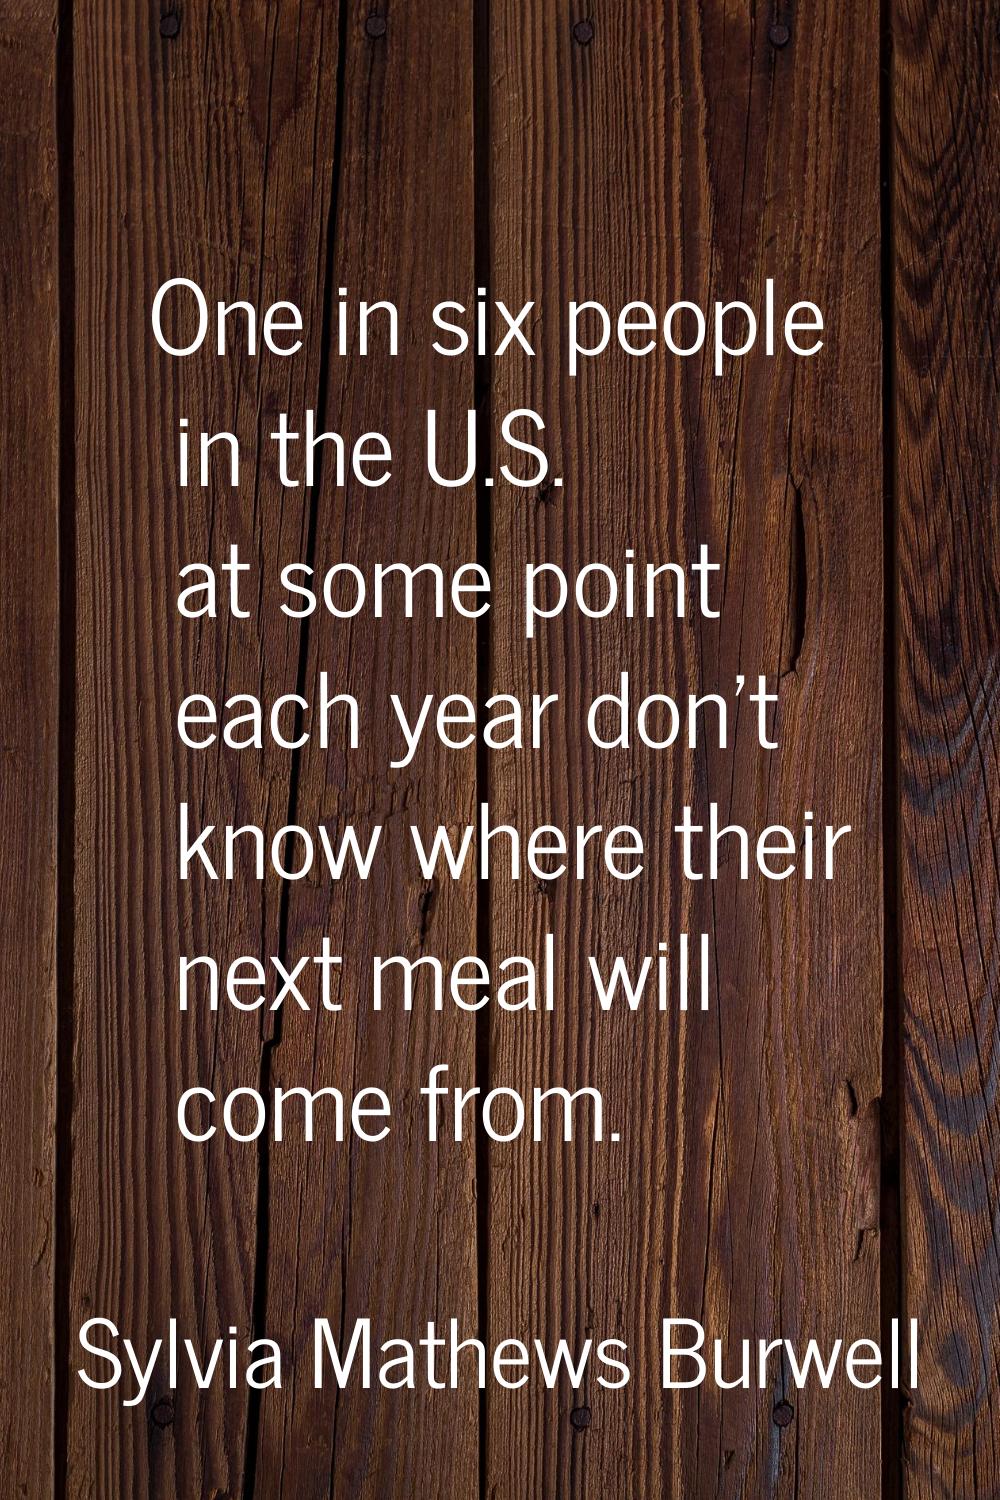 One in six people in the U.S. at some point each year don't know where their next meal will come fr